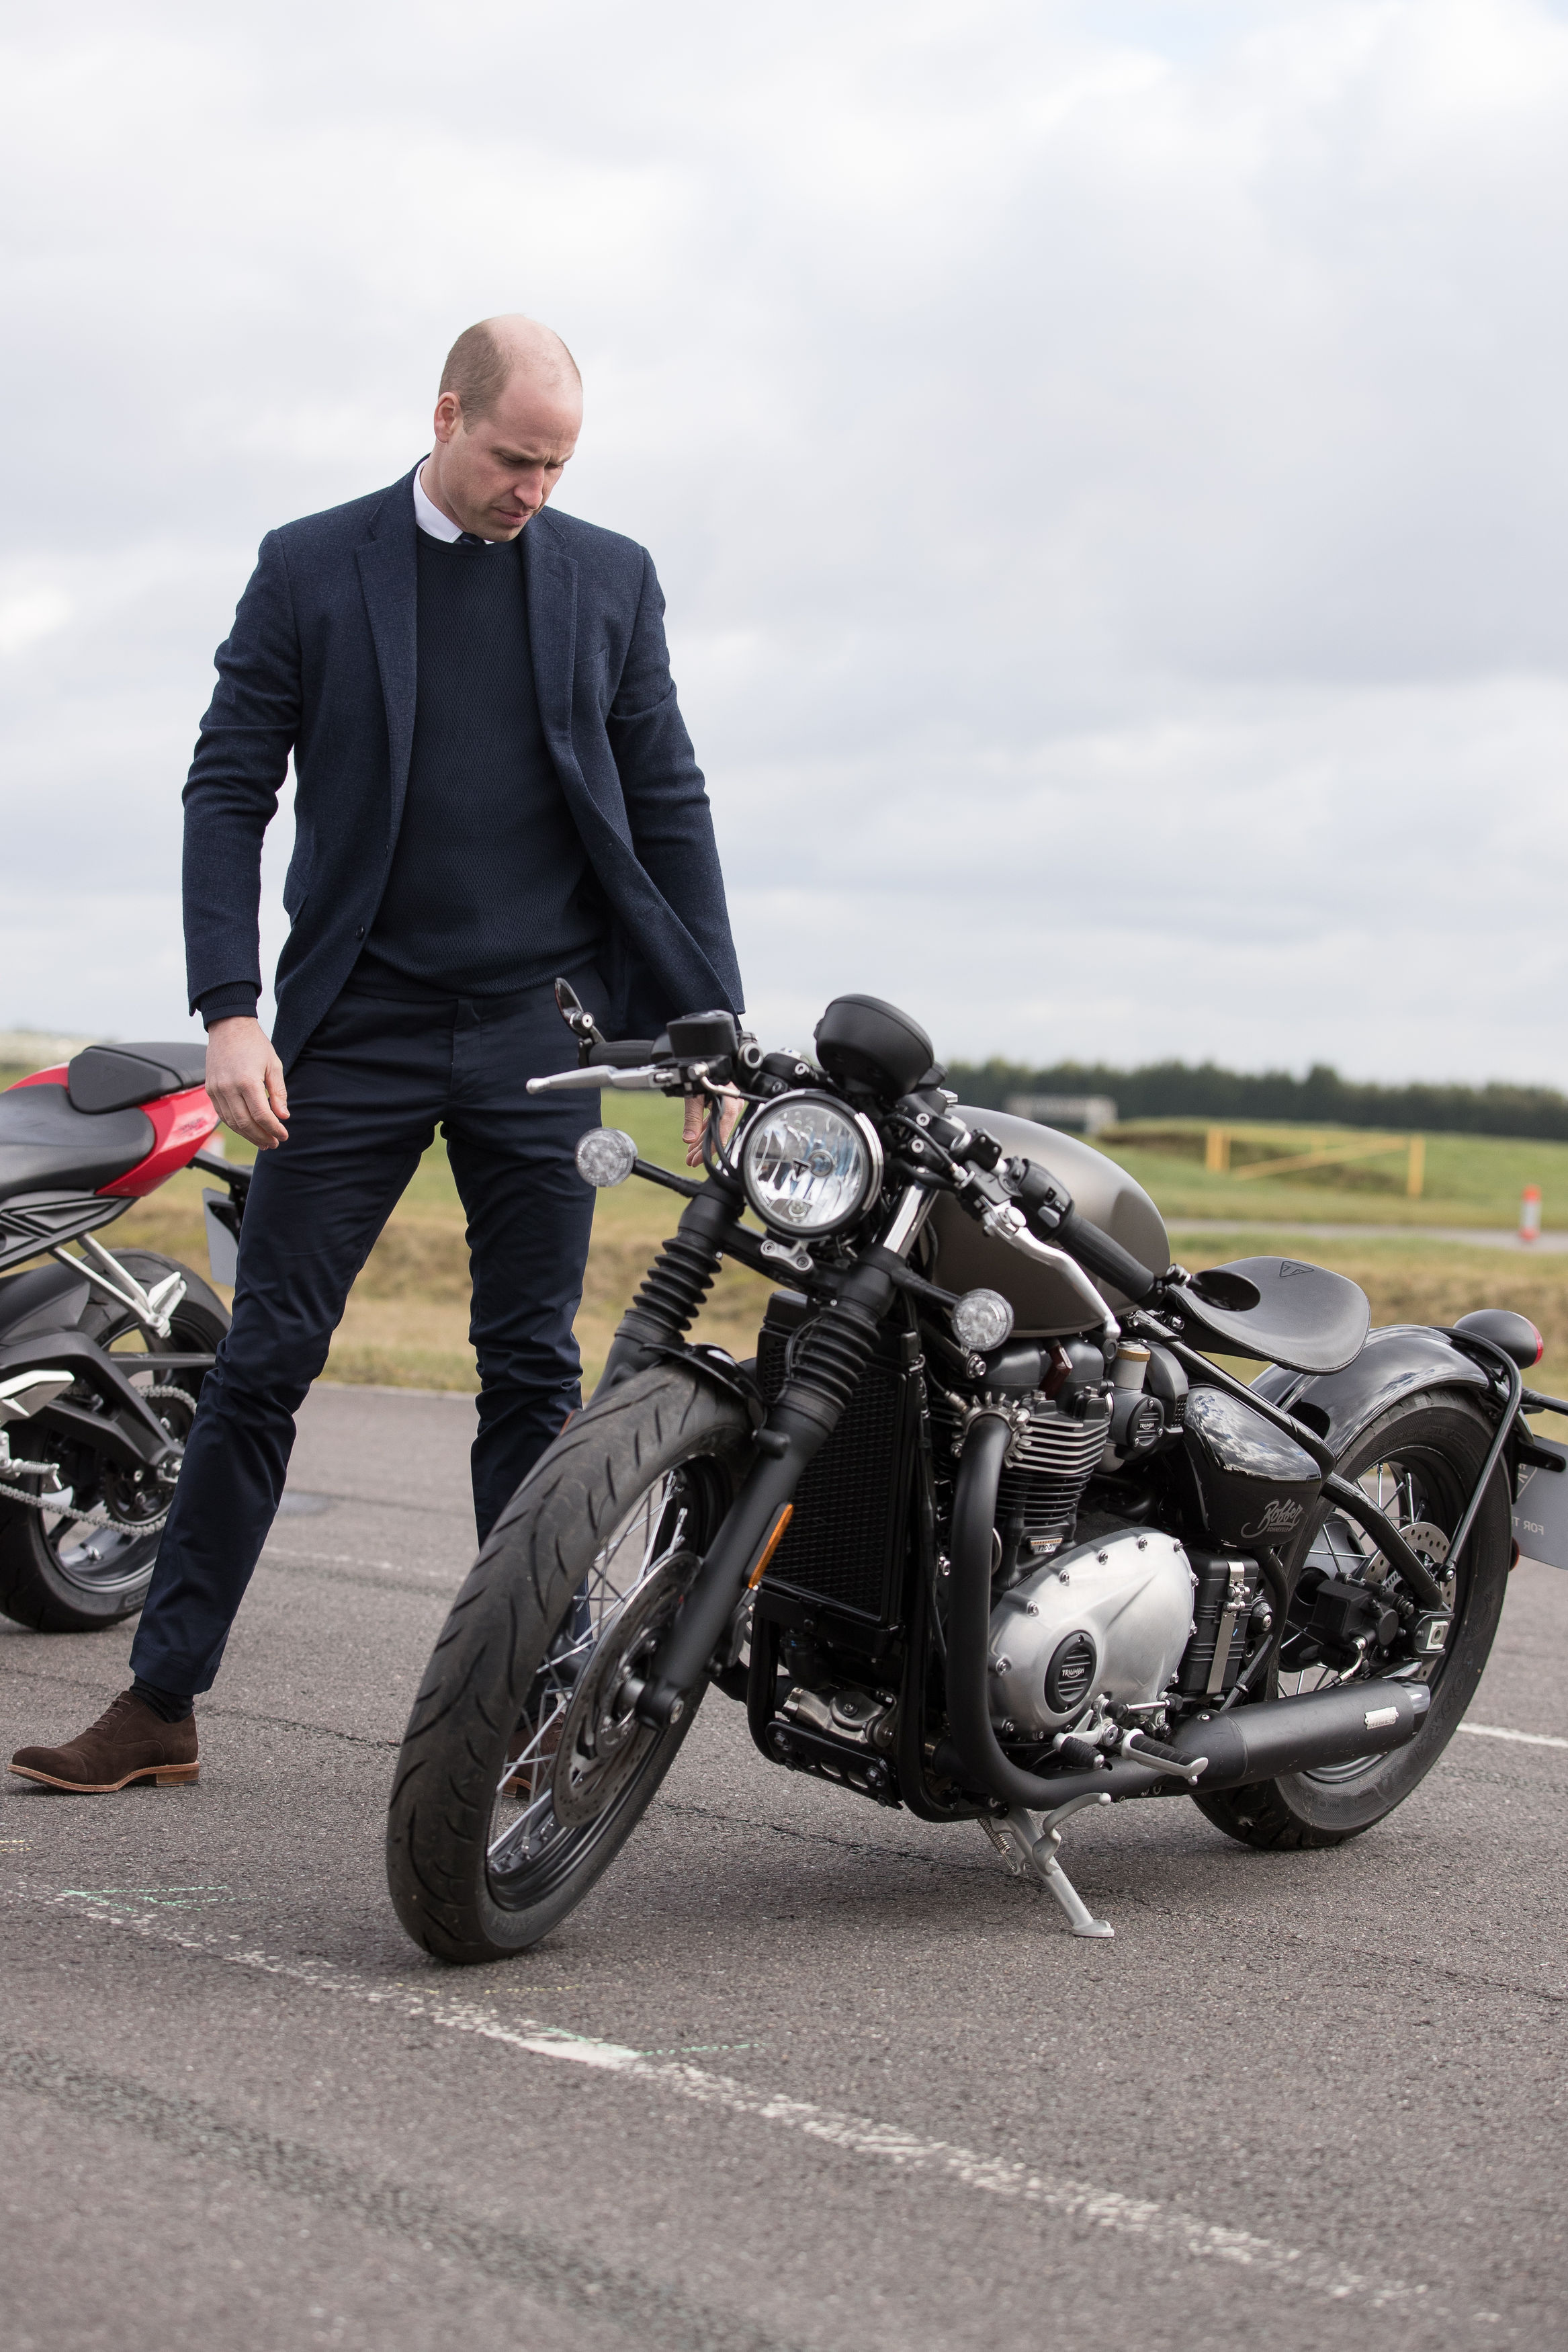 Prince William visits Triumph Motorcycles